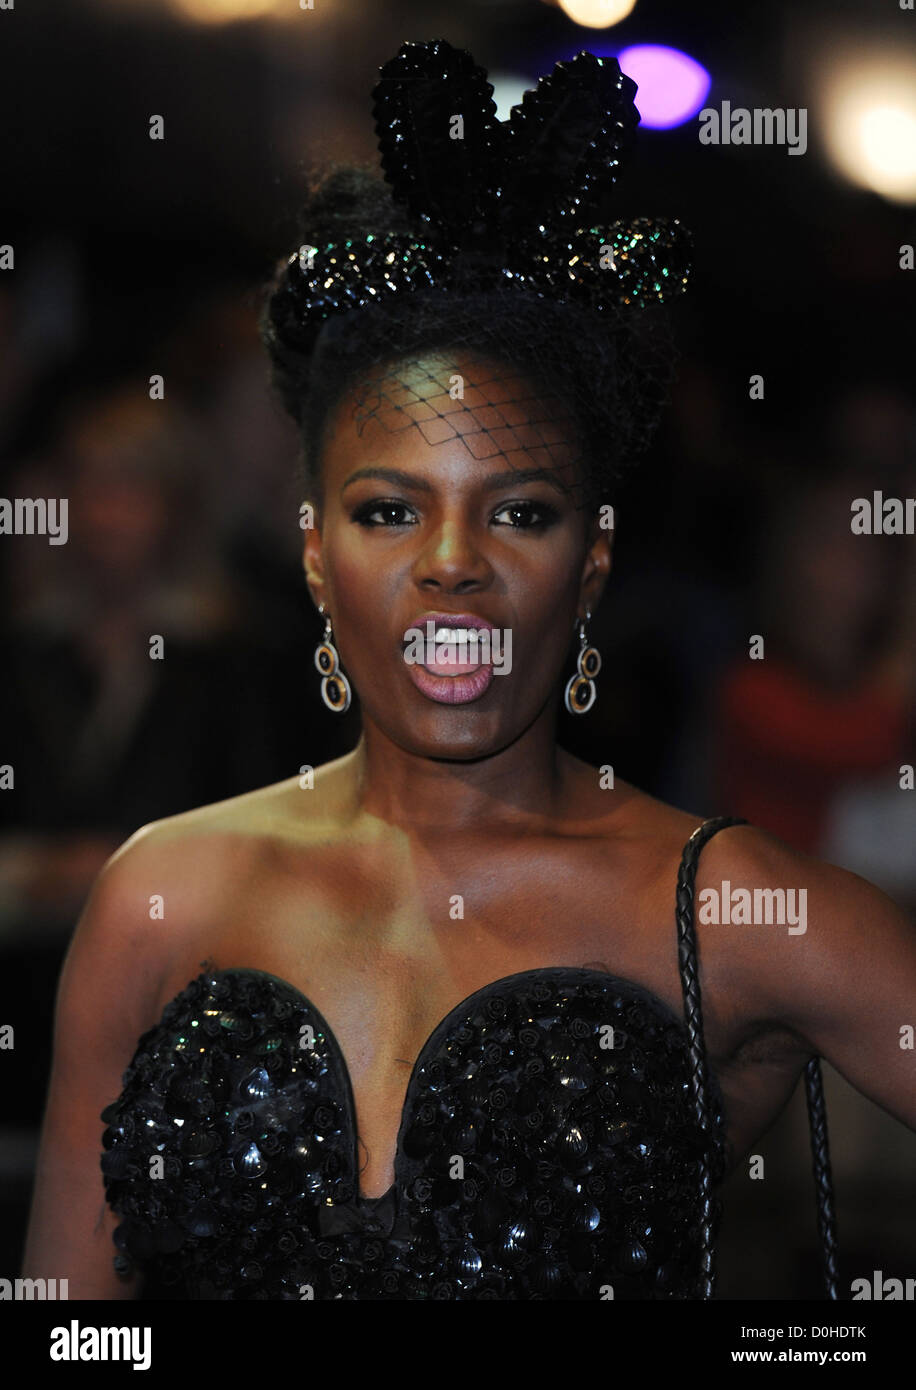 Guest London Fashion Week Spring/Summer 2011 - Ozwald Boateng - Arrivals London, England - 22.09.10 Stock Photo